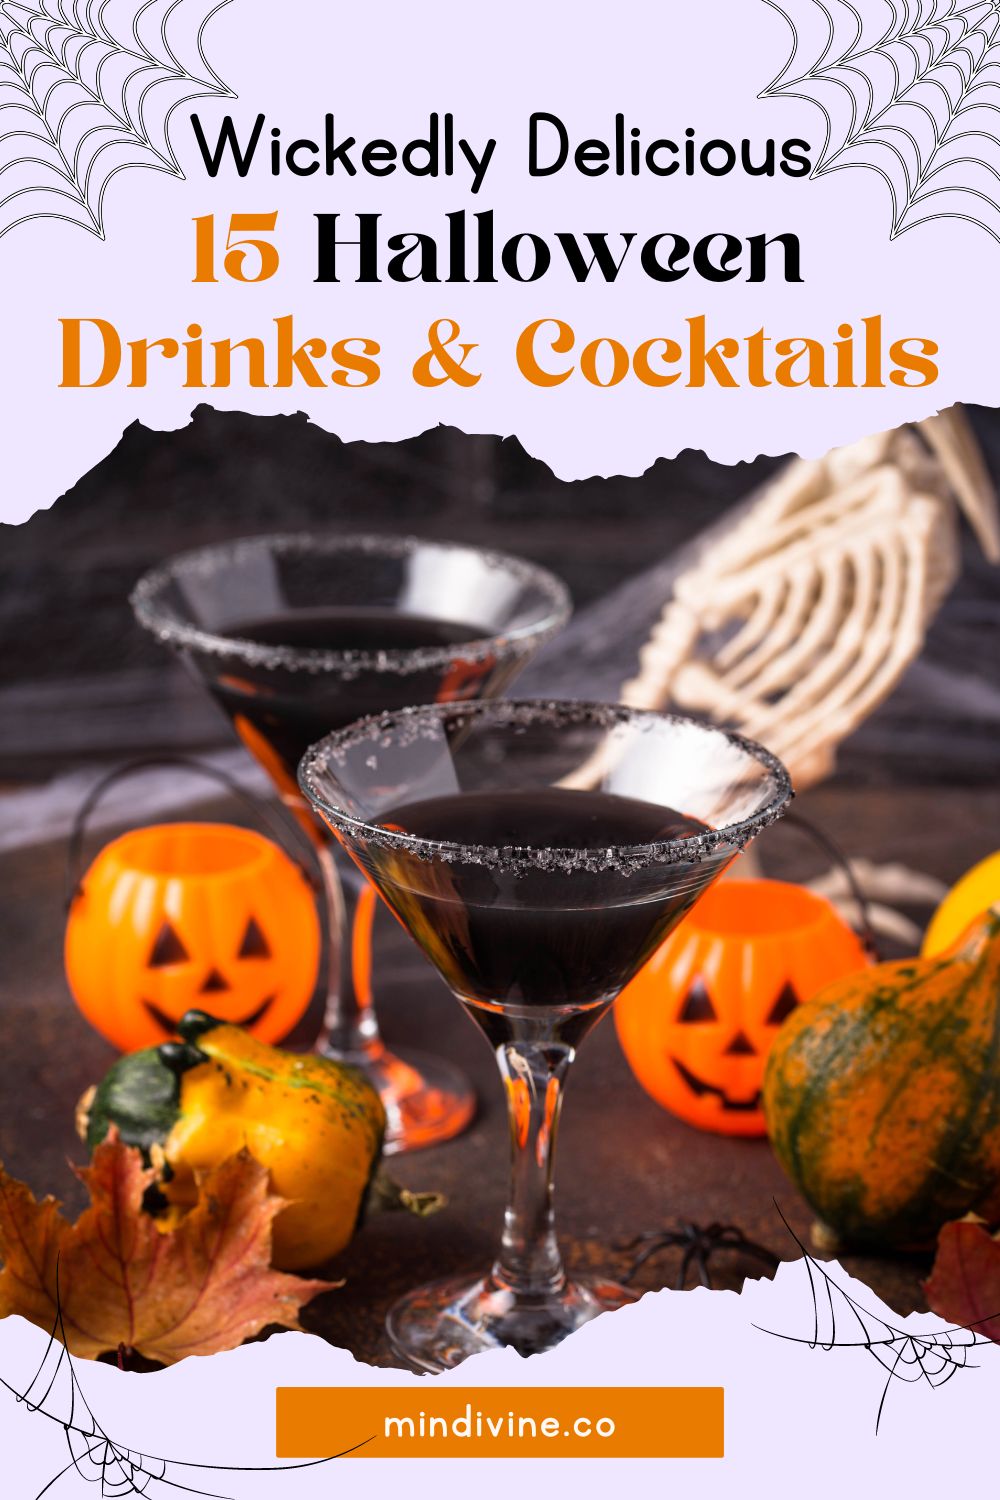 Halloween spooky drink for party, black martini cocktail.